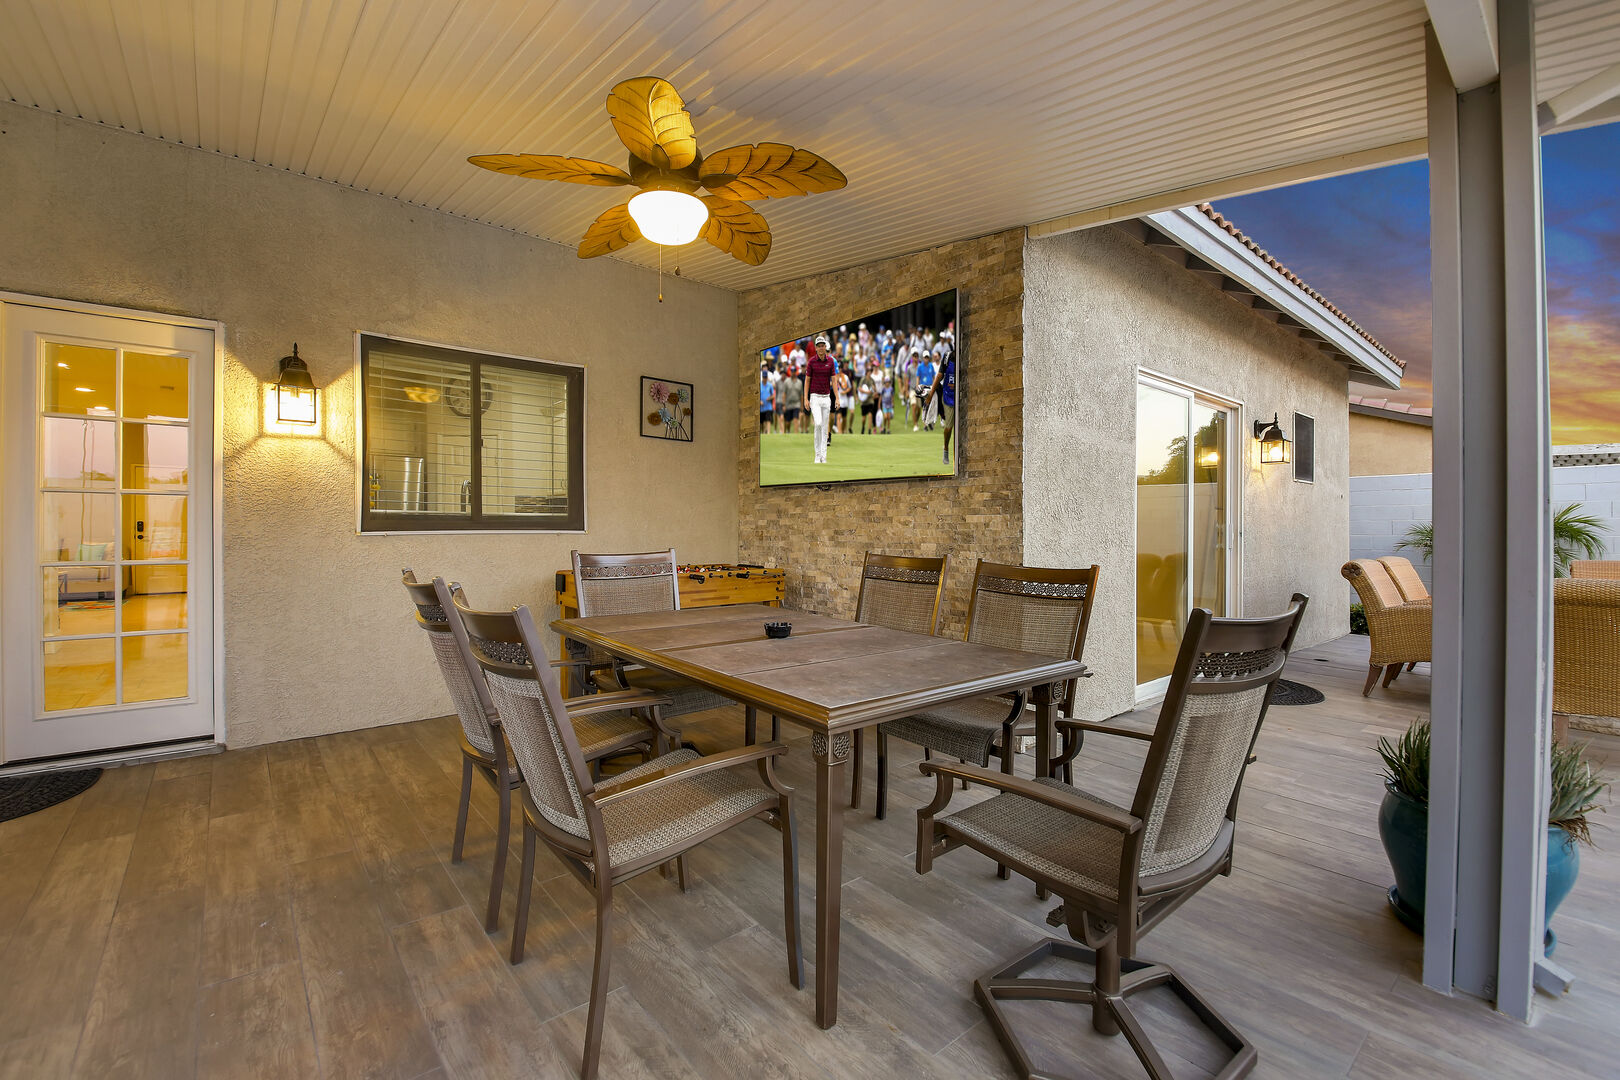 Dine alfresco at the outdoor table for six and stay cool under the ceiling fan as you watch your favorite games on the impressive 75-inch Samsung TV.